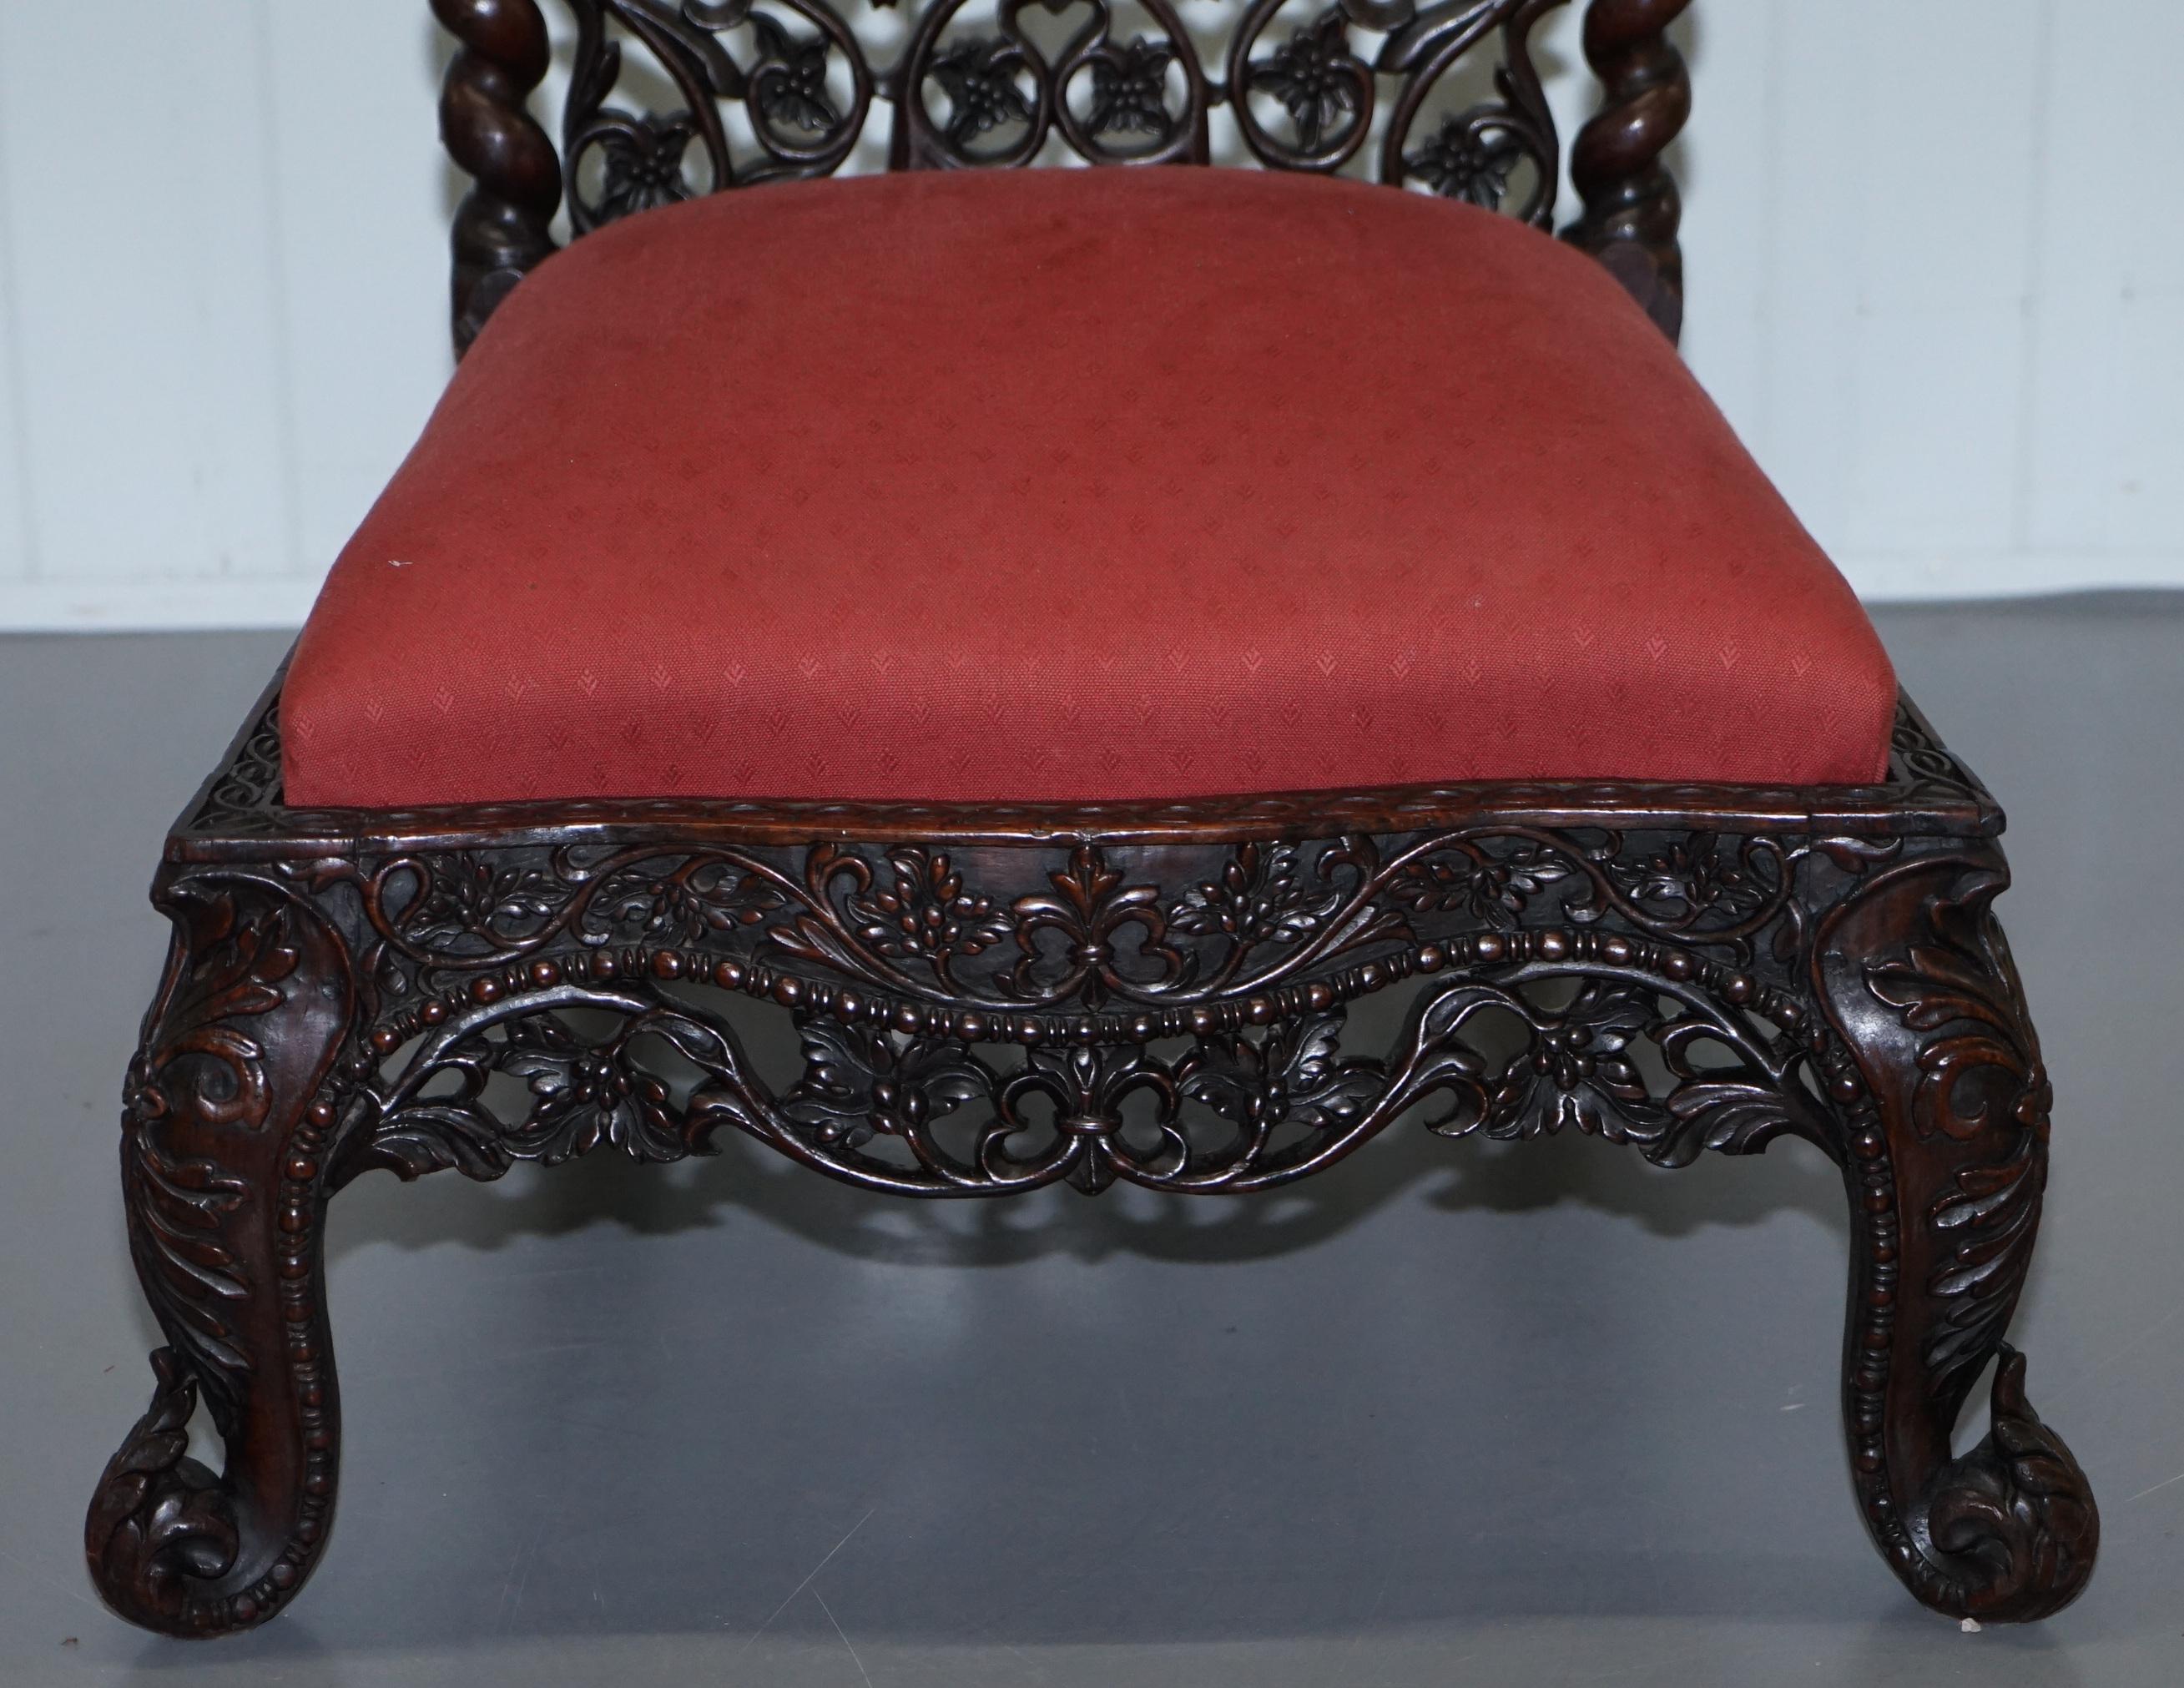 Rare circa 1880 Burmese Solid Hardwood Hand Carved Floral Chair High Back Ornate For Sale 4